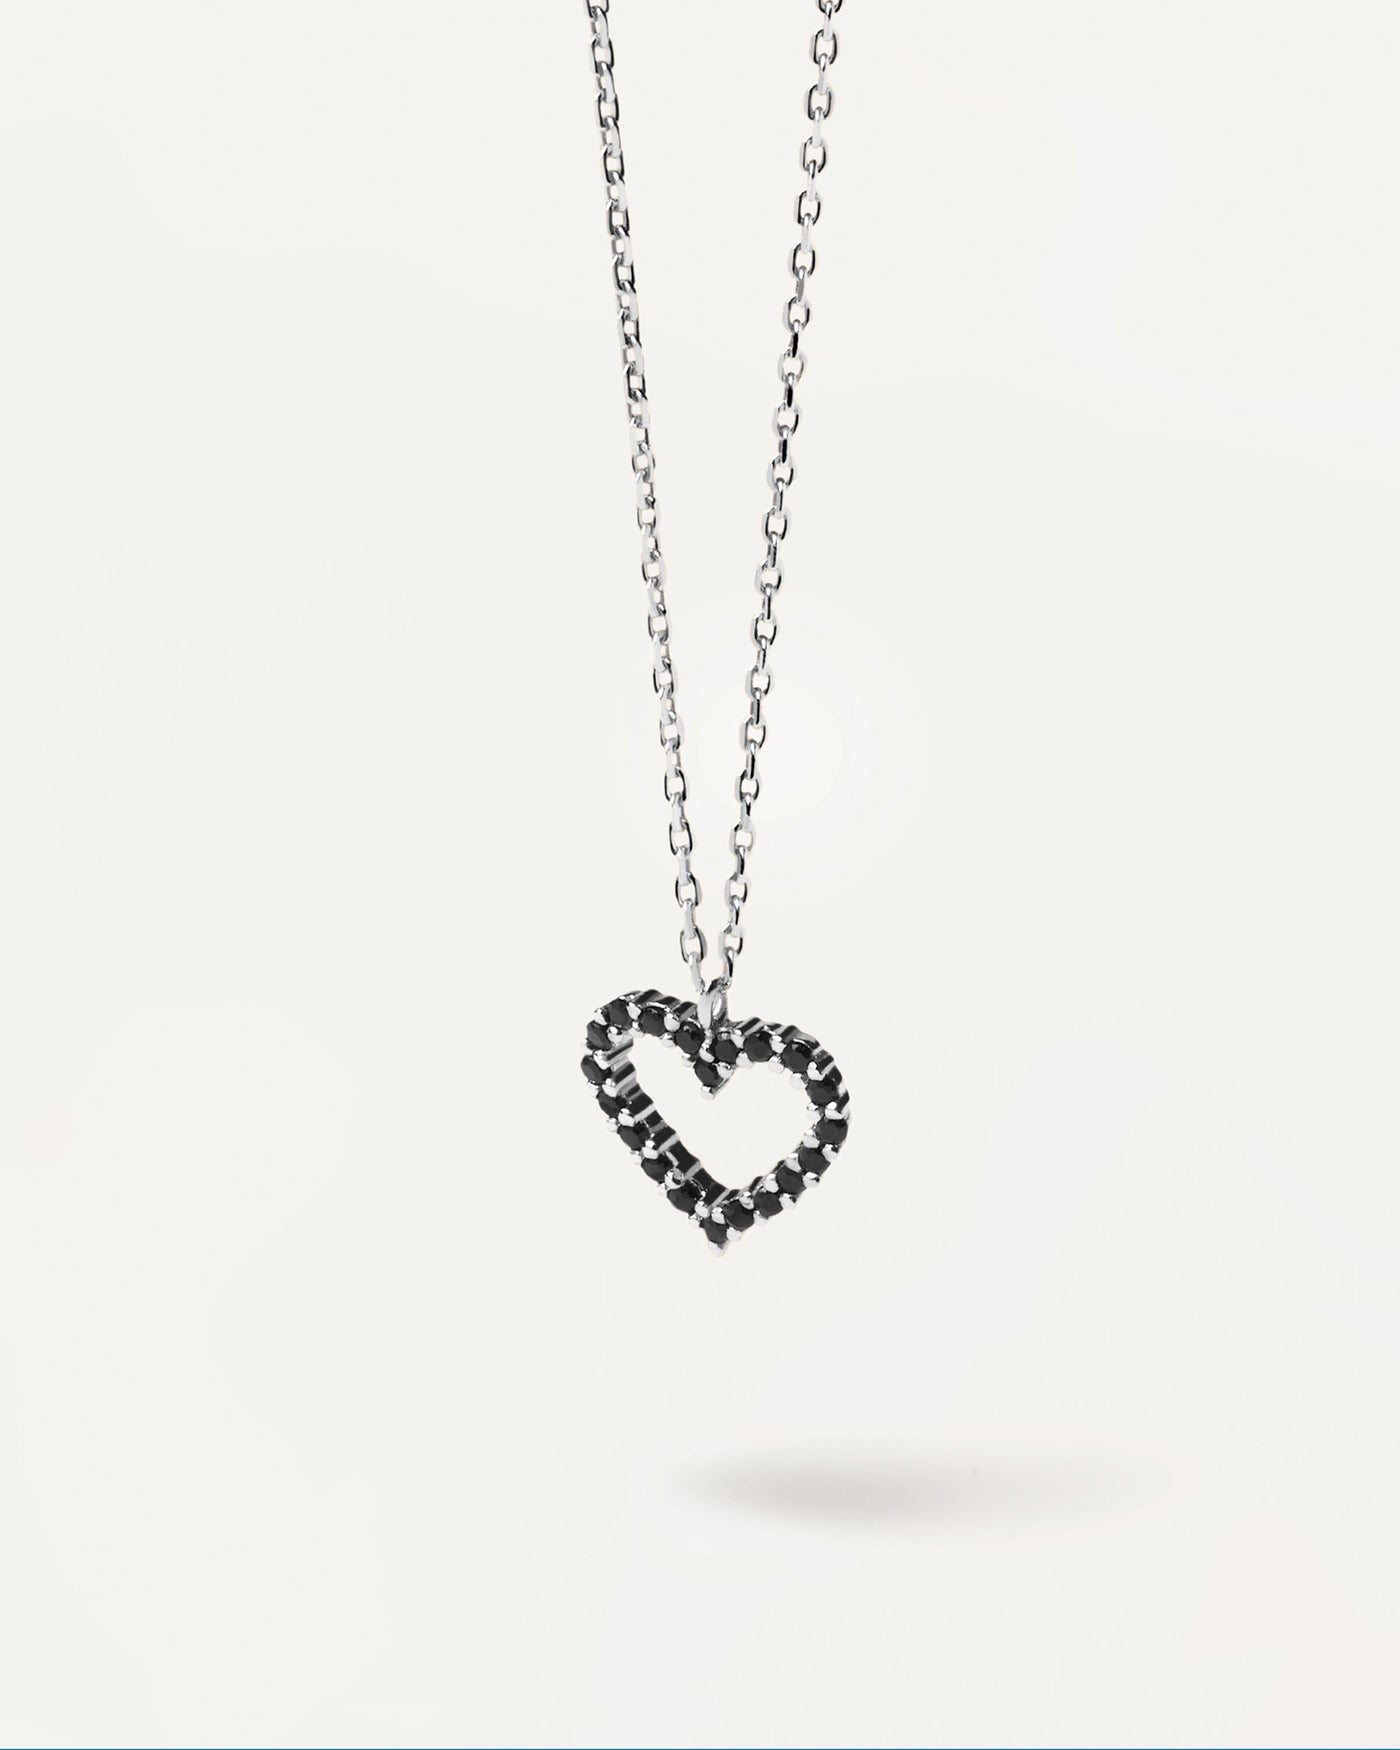 2023 Selection | Black Heart Necklace Silver. Get the latest arrival from PDPAOLA. Place your order safely and get this Best Seller. Free Shipping over 40€